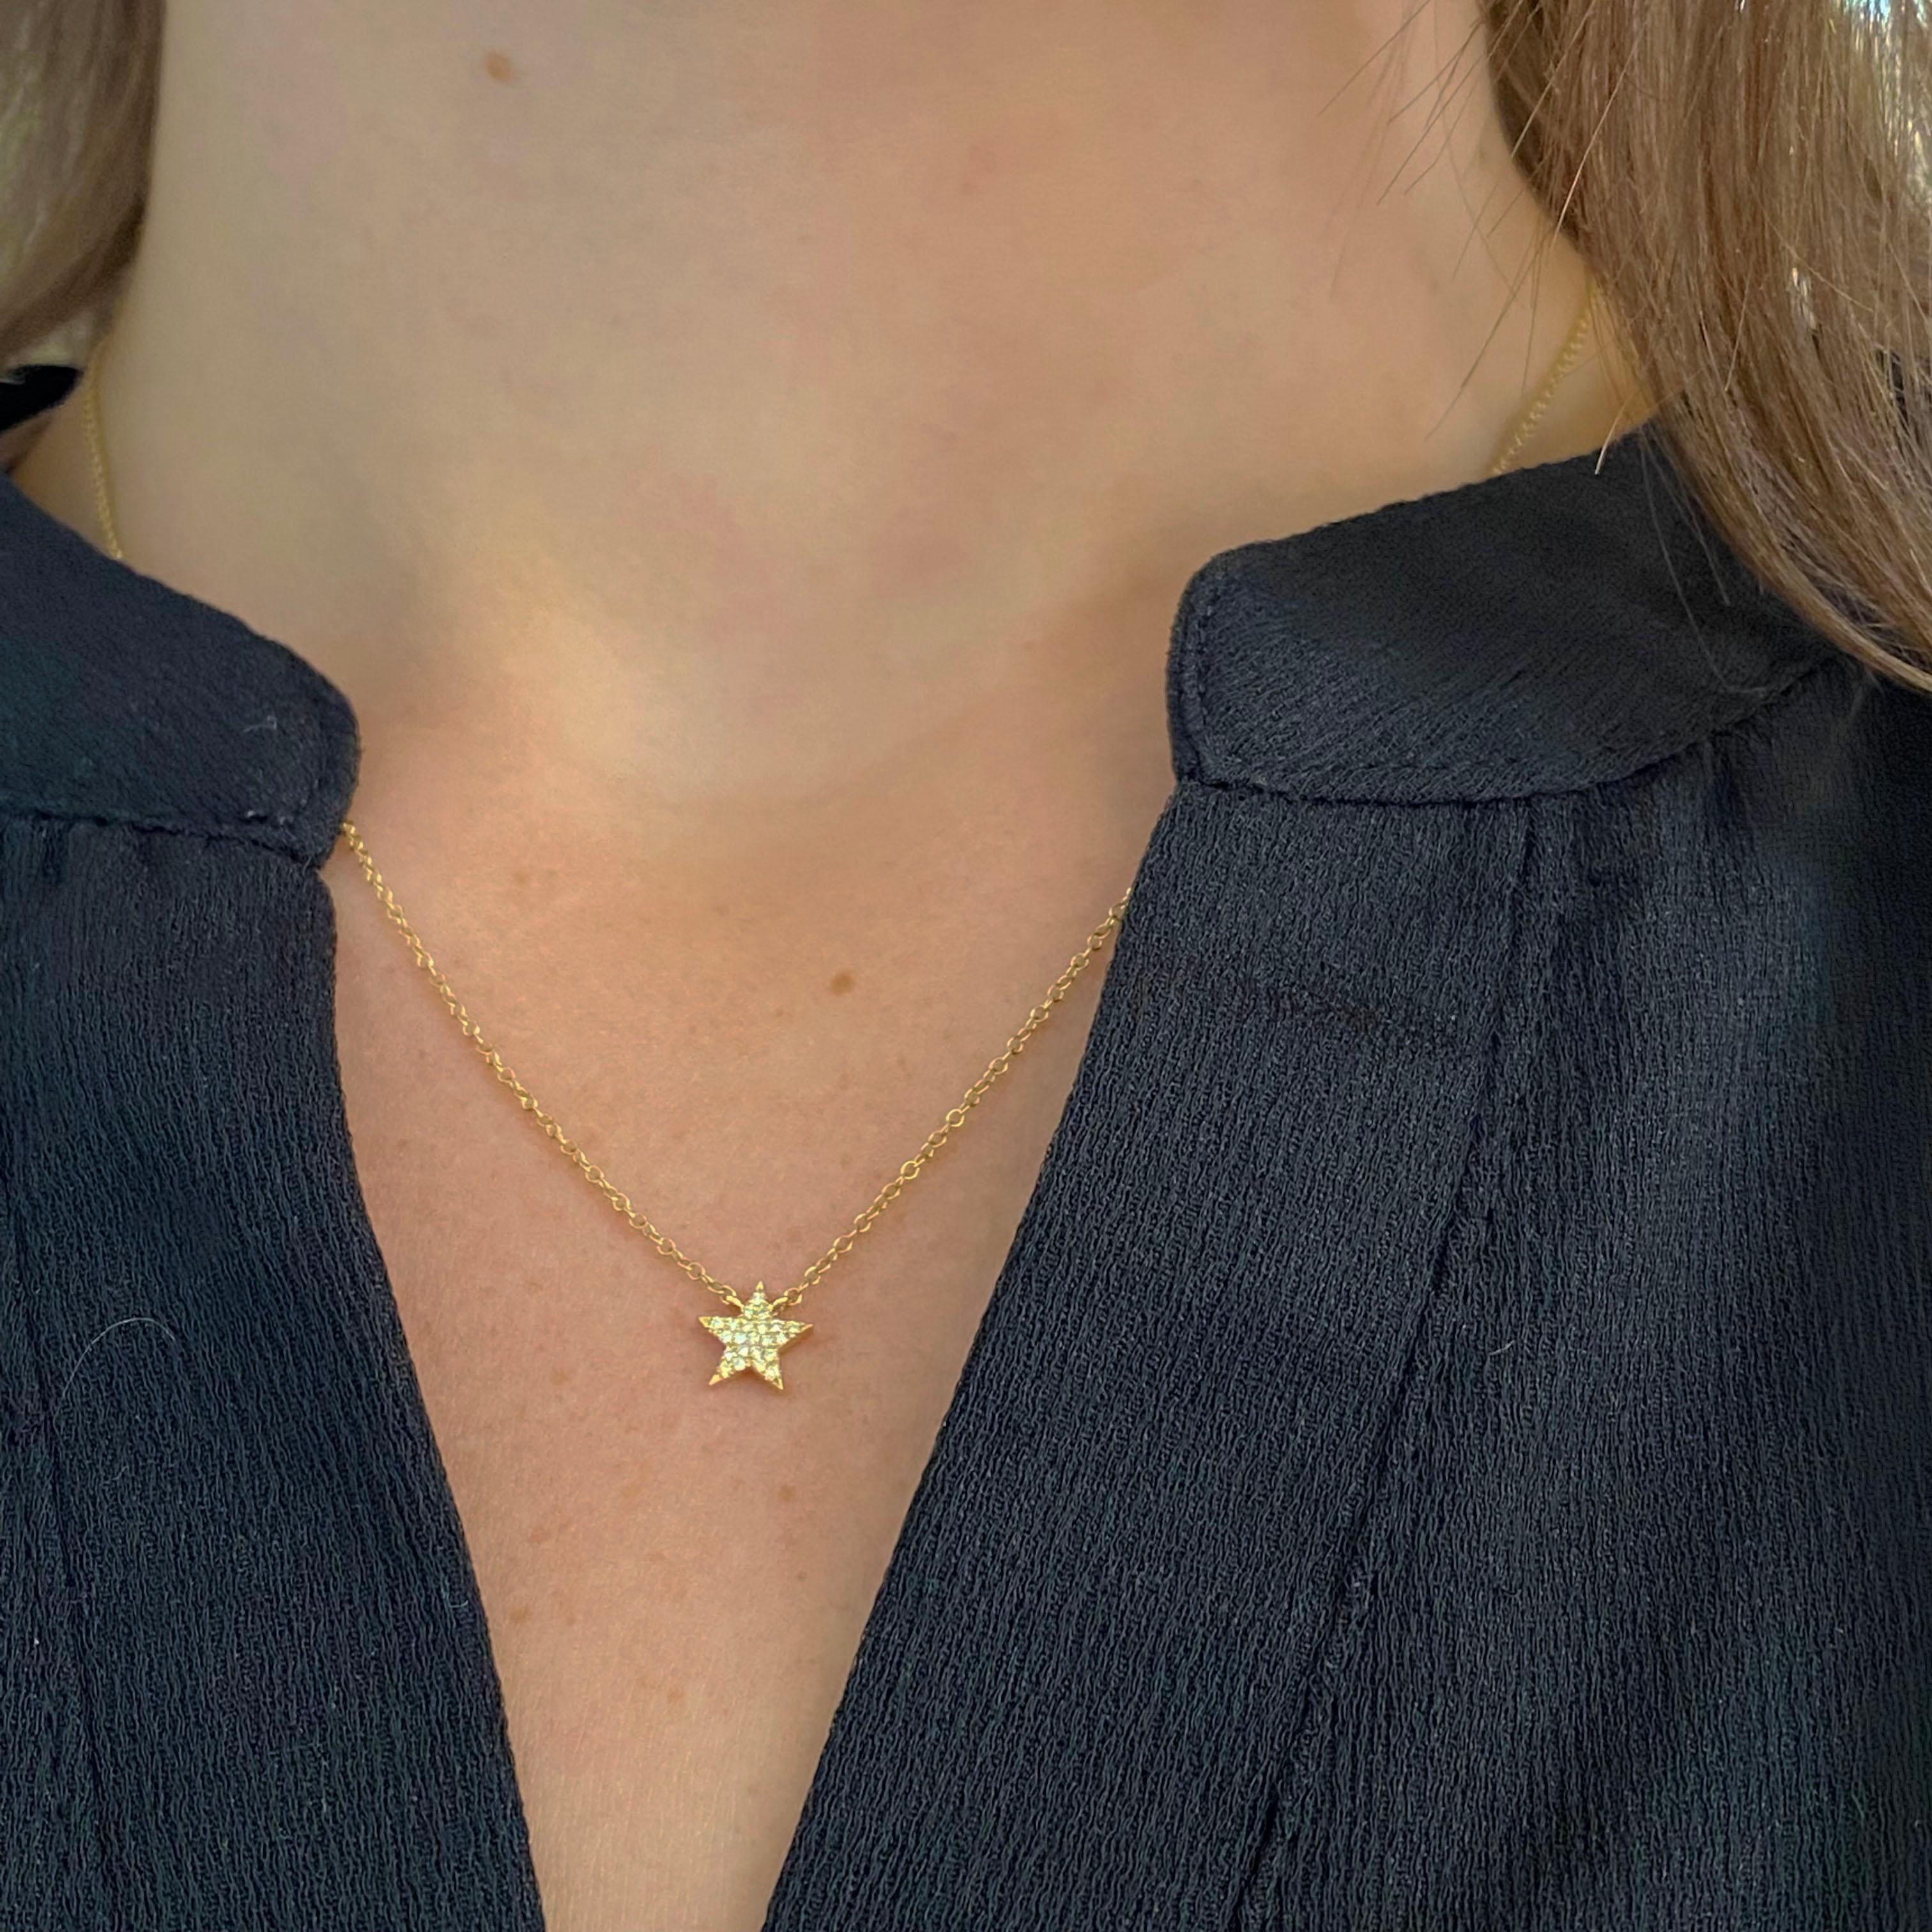 The details for this beautiful necklace are listed below:
Metal Quality: 14 kt Yellow Gold 
Pendant Style: Attached 
Diamond Number: 23
Diamond Shape: Round Brilliant 
Diamond Total Weight: .05 ct 
Diamond Clarity: VS2 (Excellent, Eye Clean)
Diamond